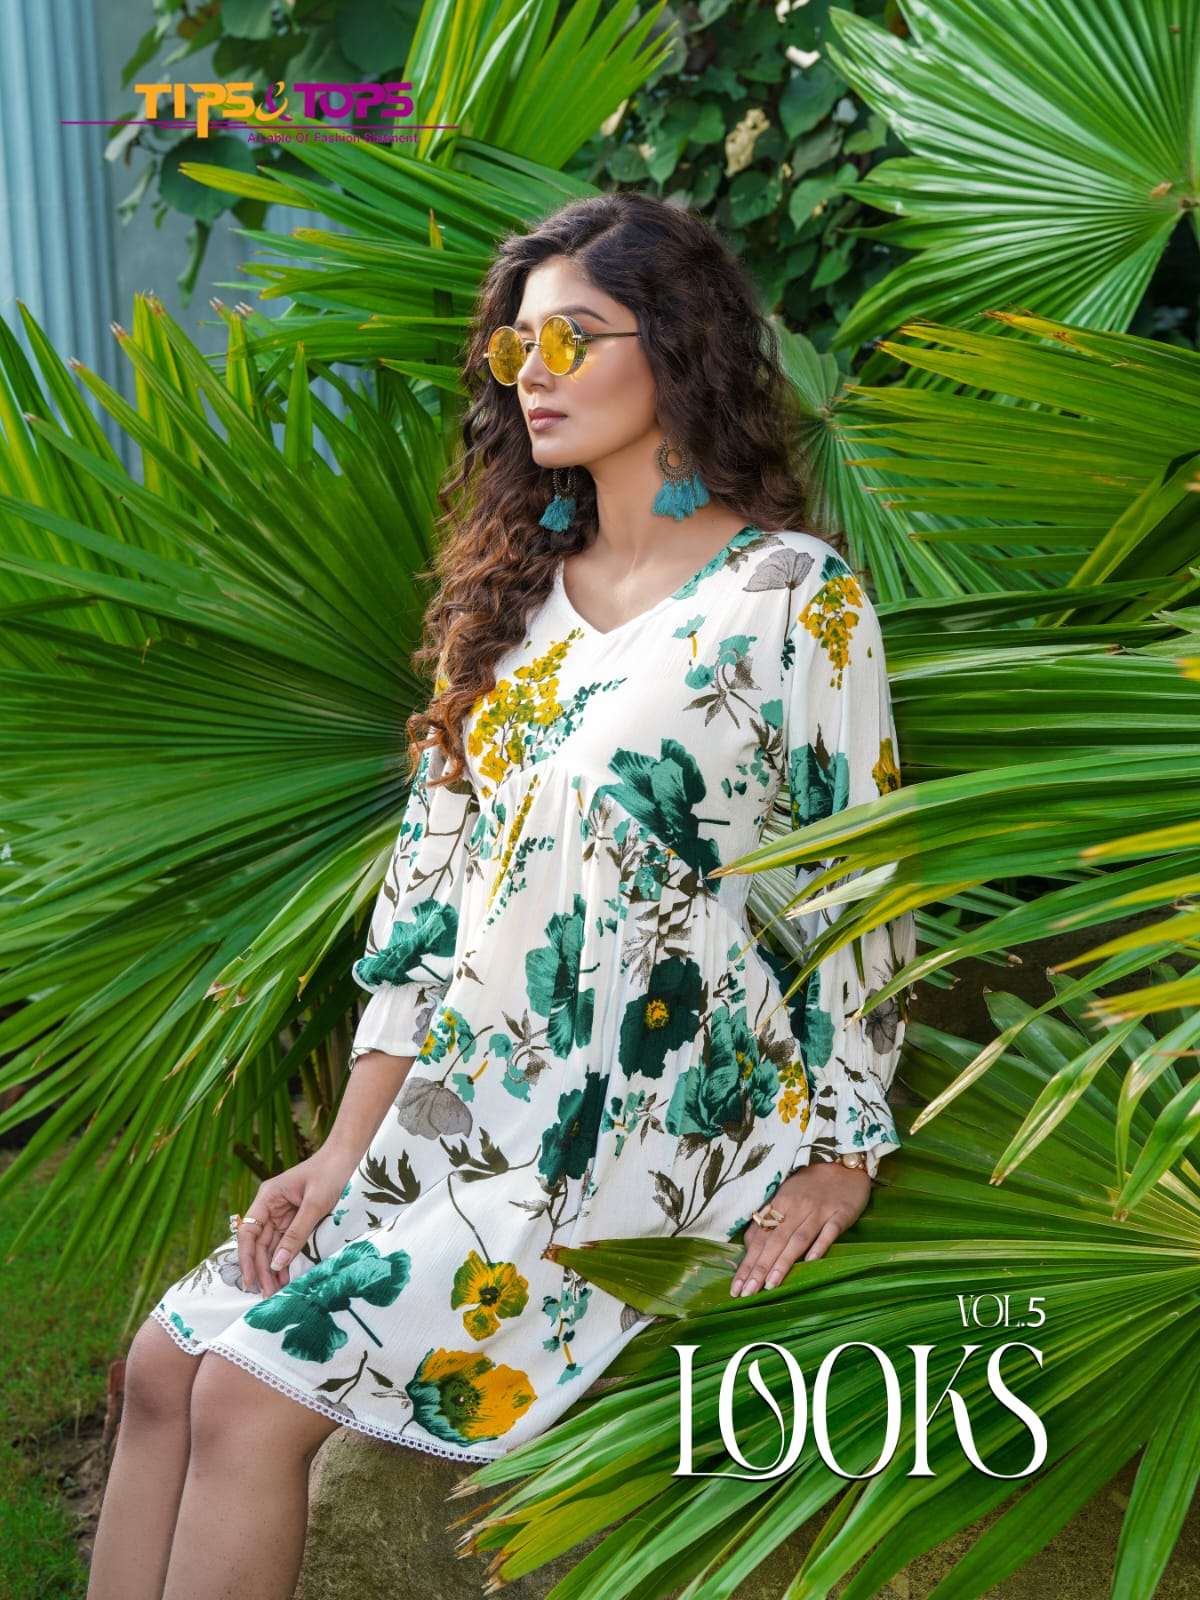 tips & tops looks vol-5 101-106 series rayon printed short kurtis collection at wholesale price